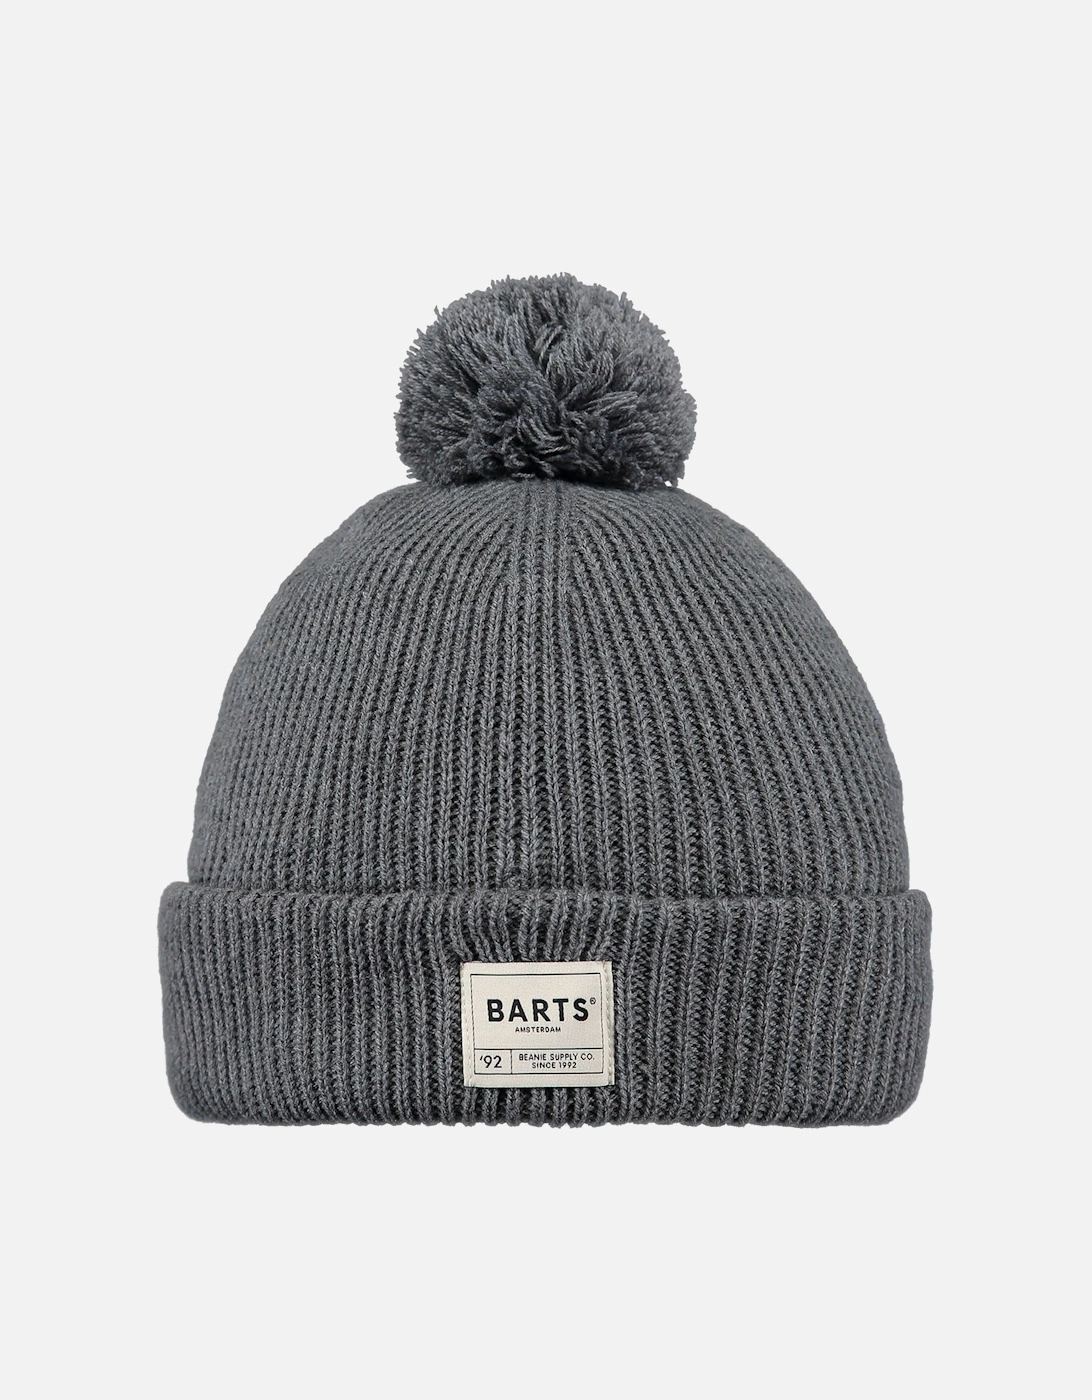 Mens Arkade Stretchy Knitted Bobble Hat